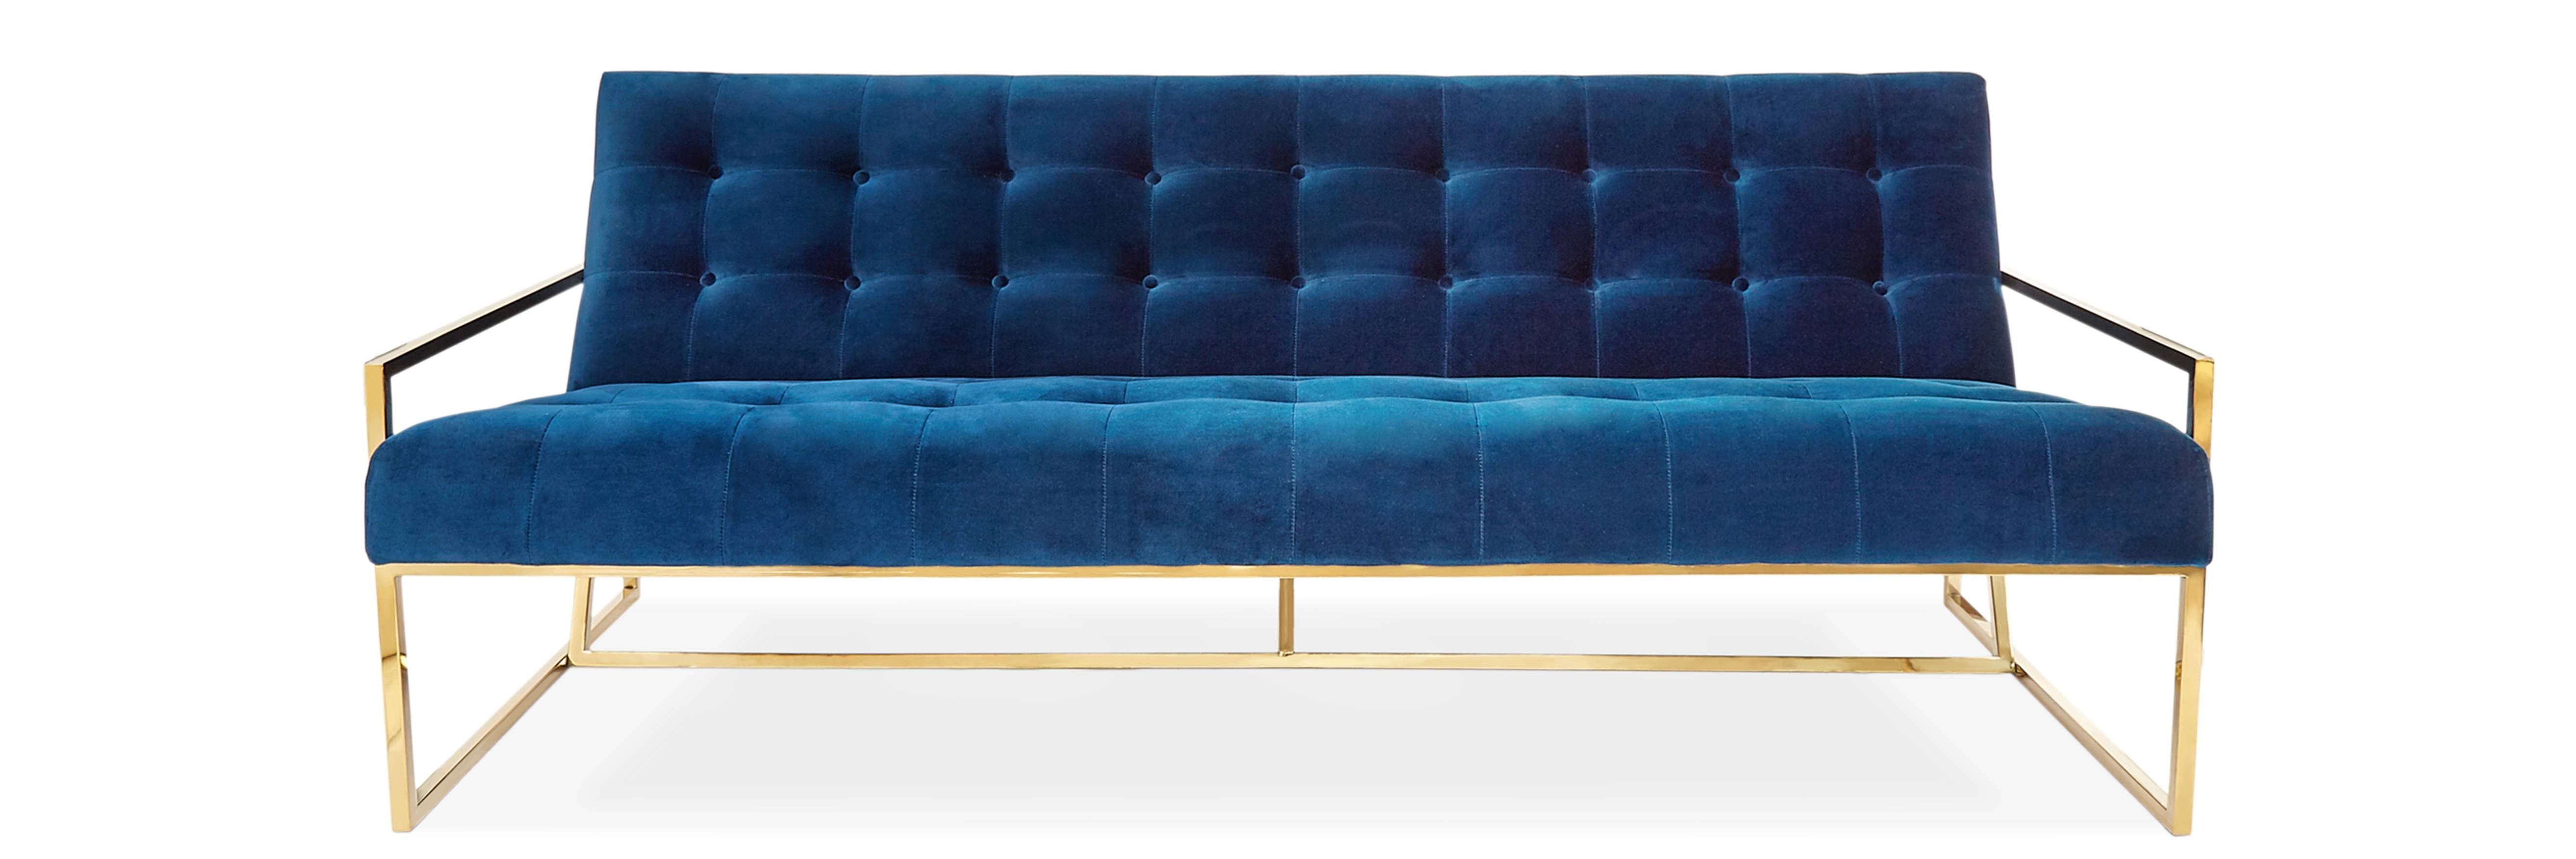 Trend Watch: The Big Blue Sofa – Western Living Magazine In Chintz Sofas (View 12 of 22)